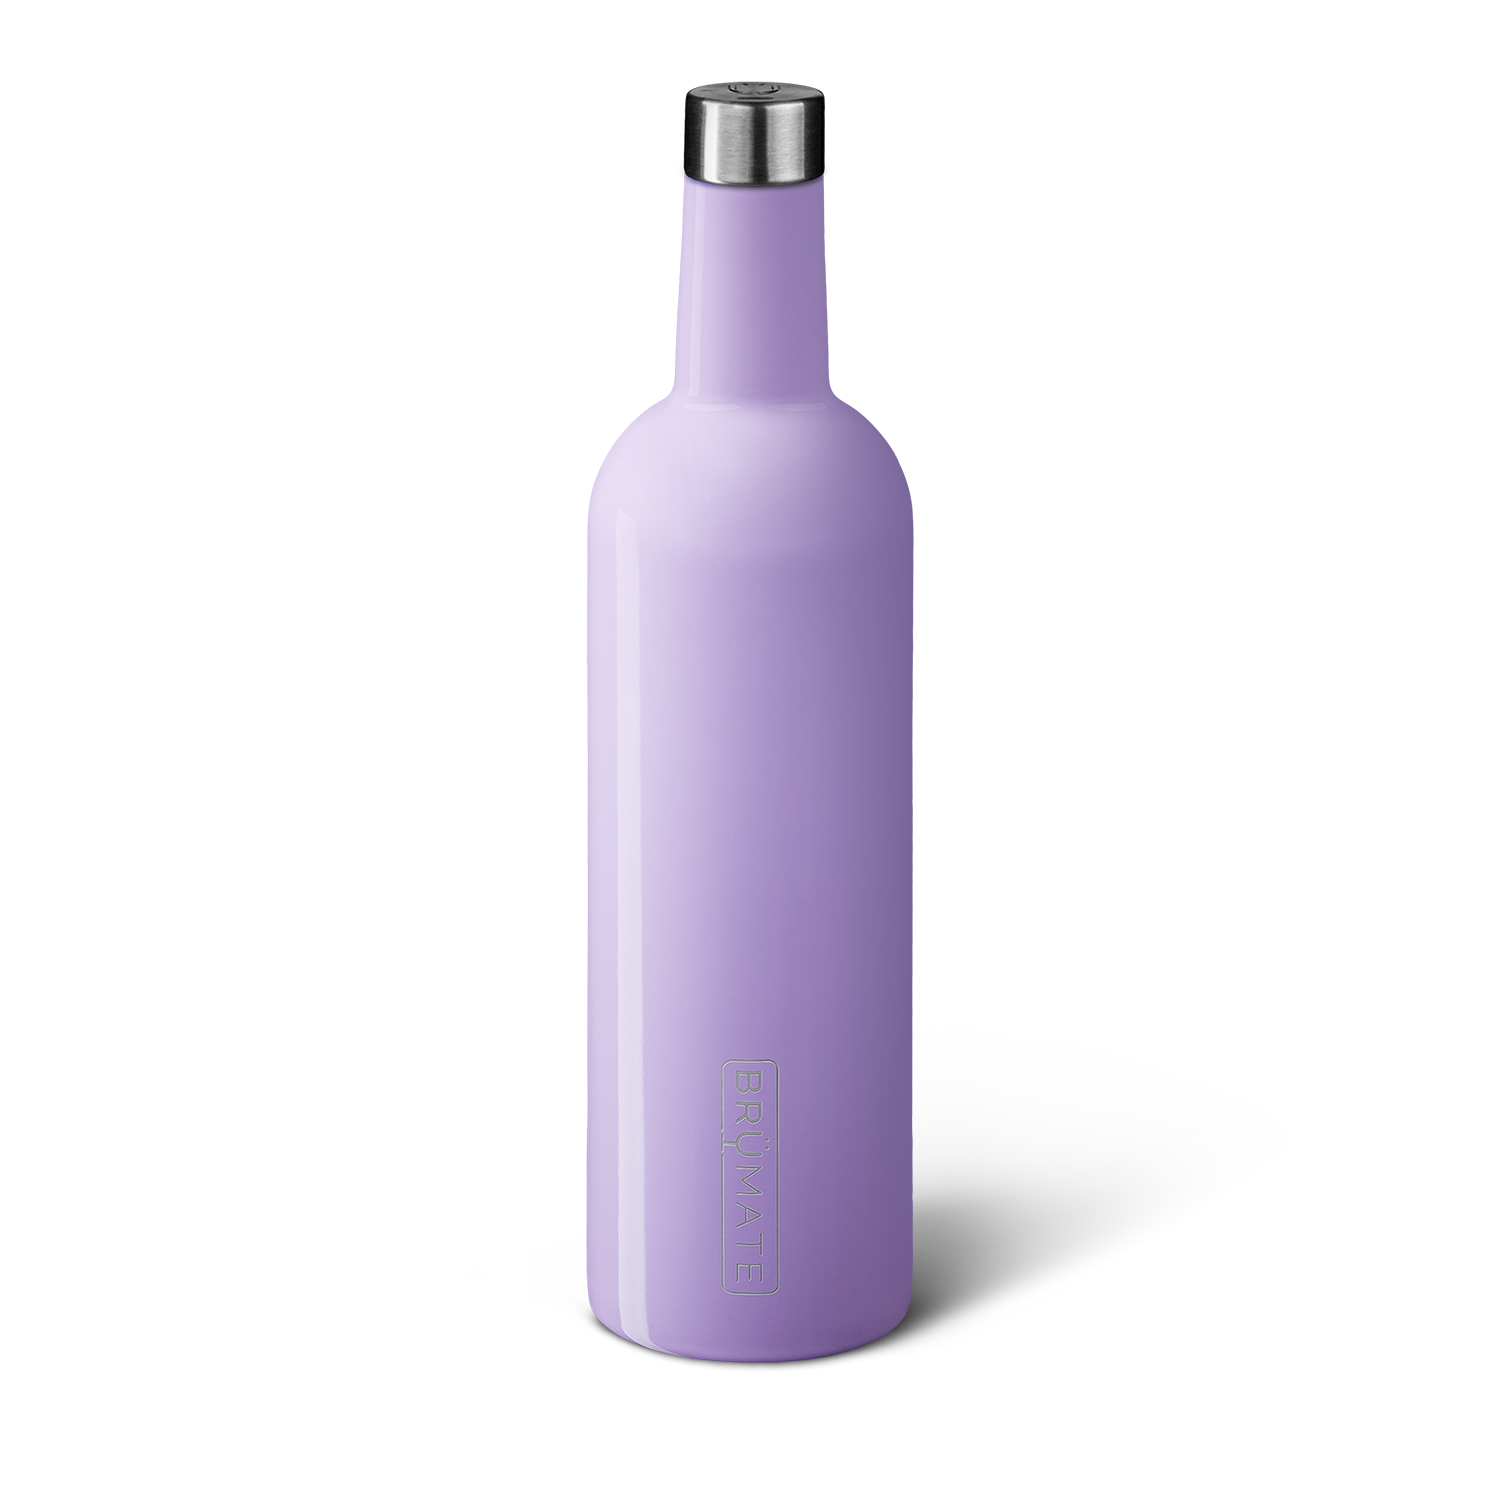 https://cdn.shopify.com/s/files/1/1114/2308/products/winesulator-violet.png?v=1660191405